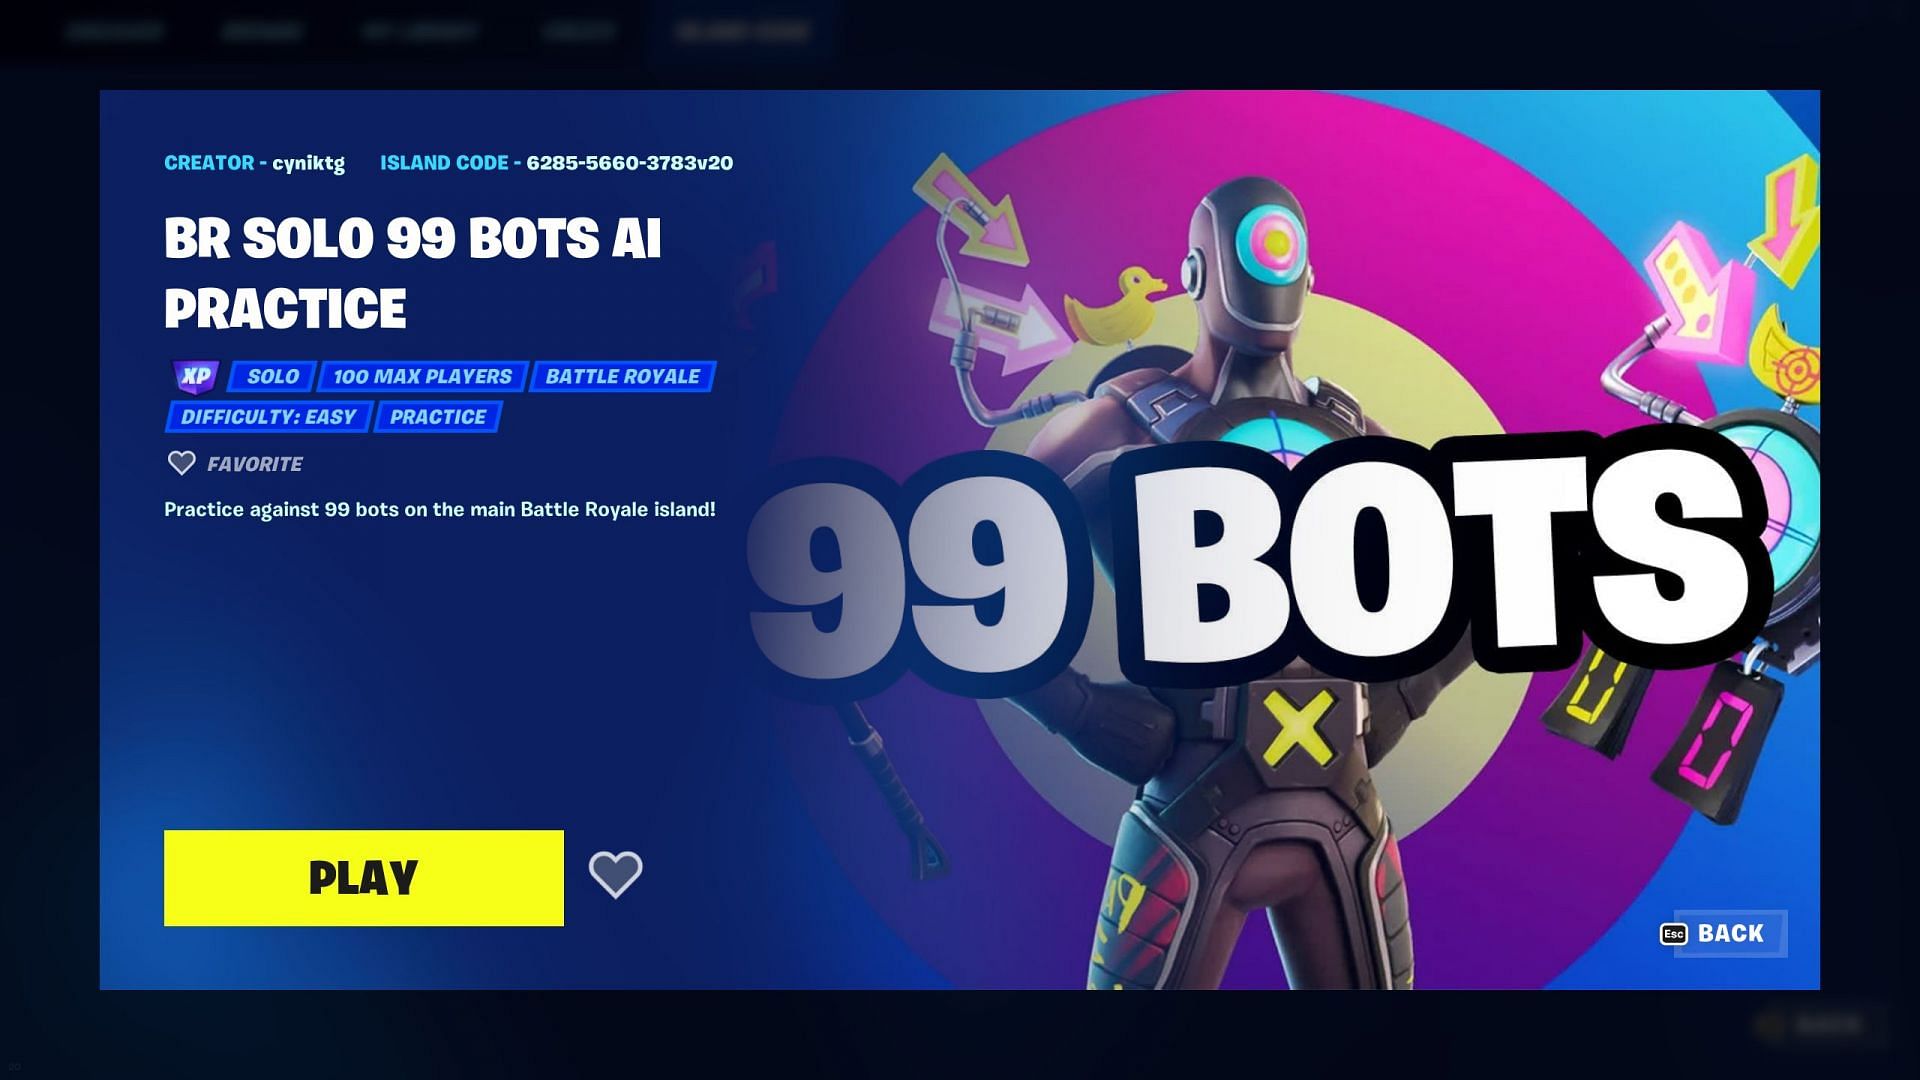 How to play against bots in Fortnite